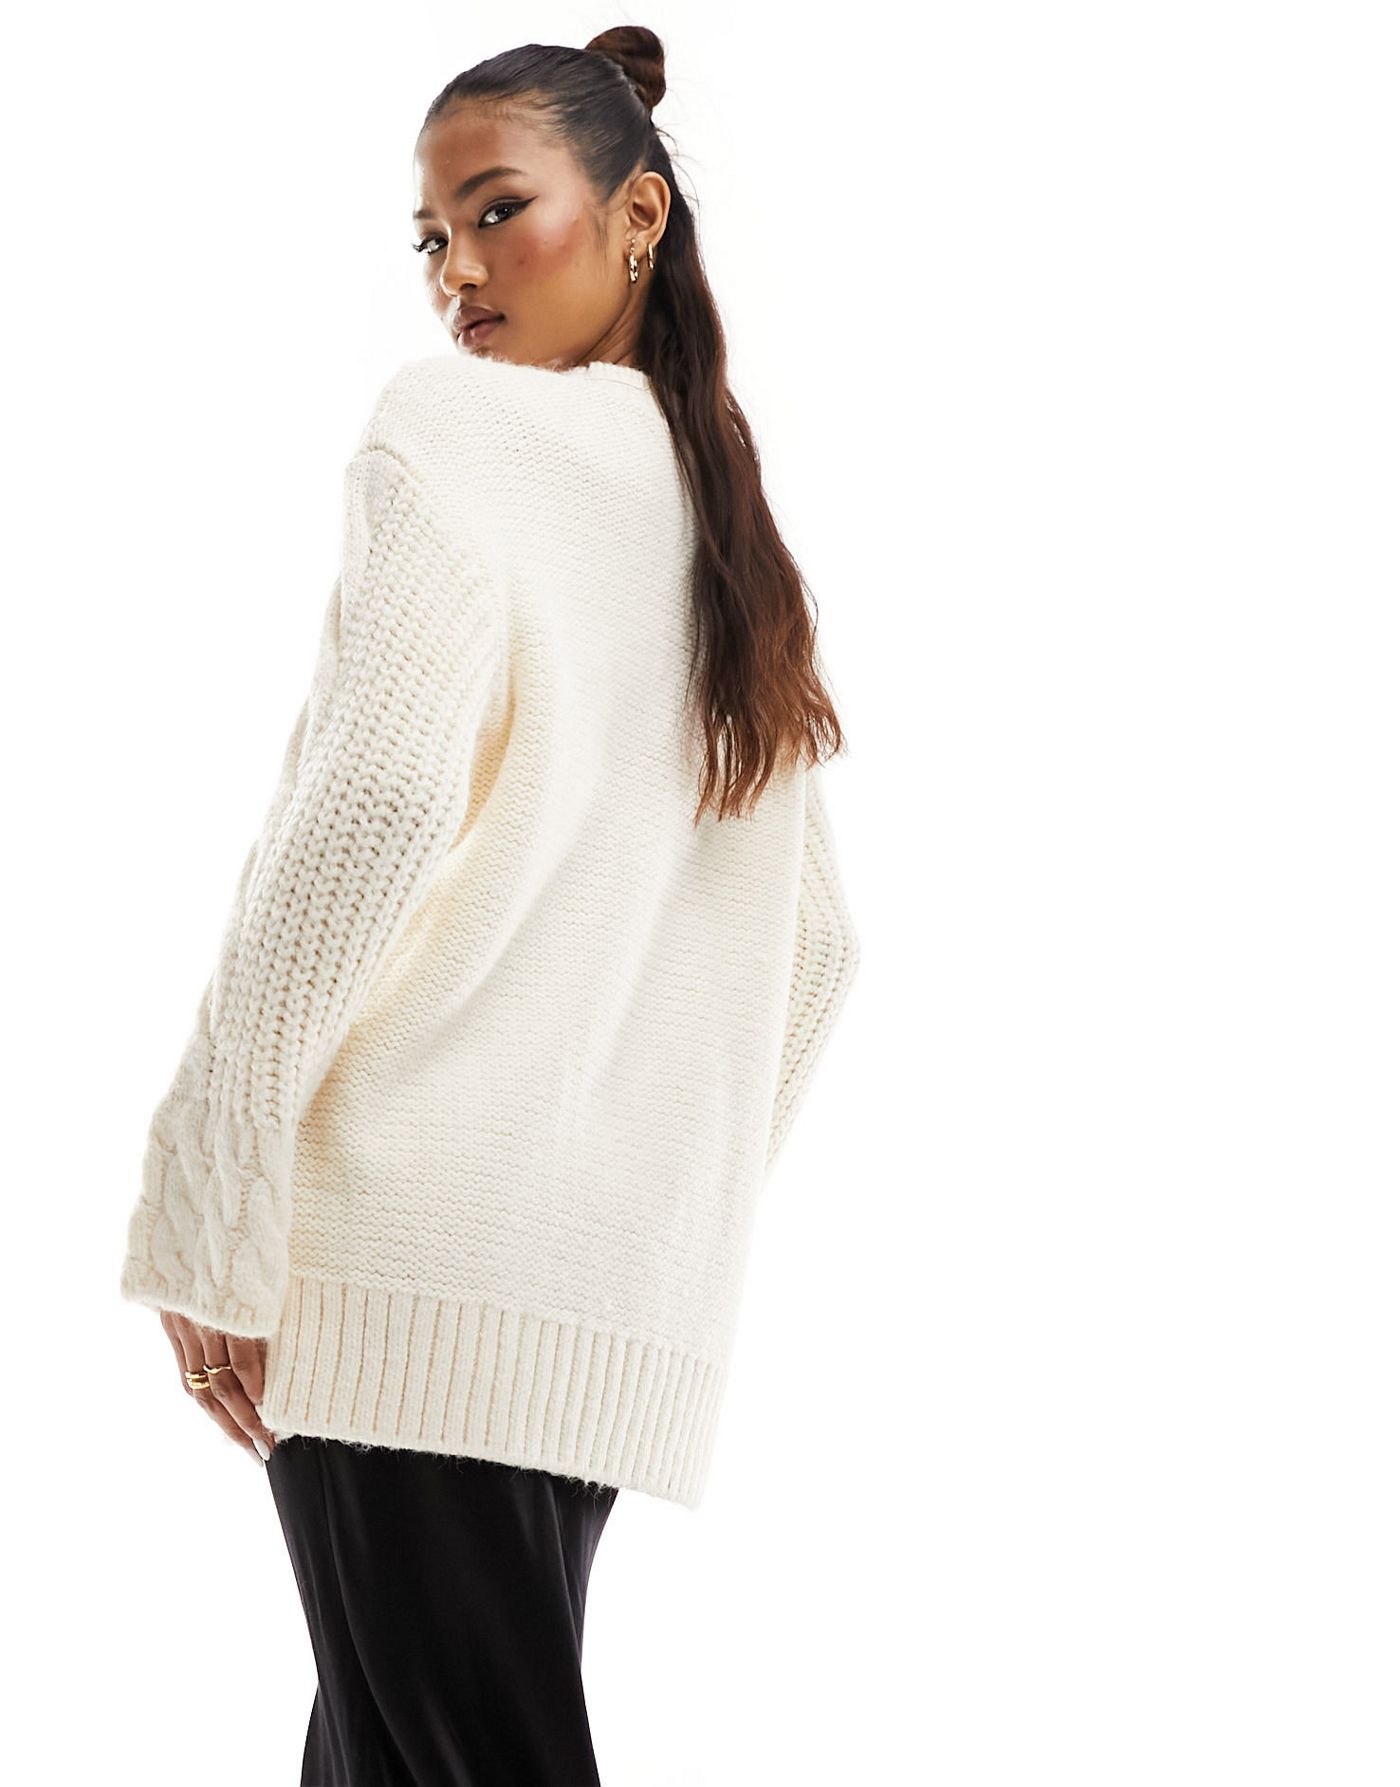 River Island v-neck mixed cable knit jumper in cream